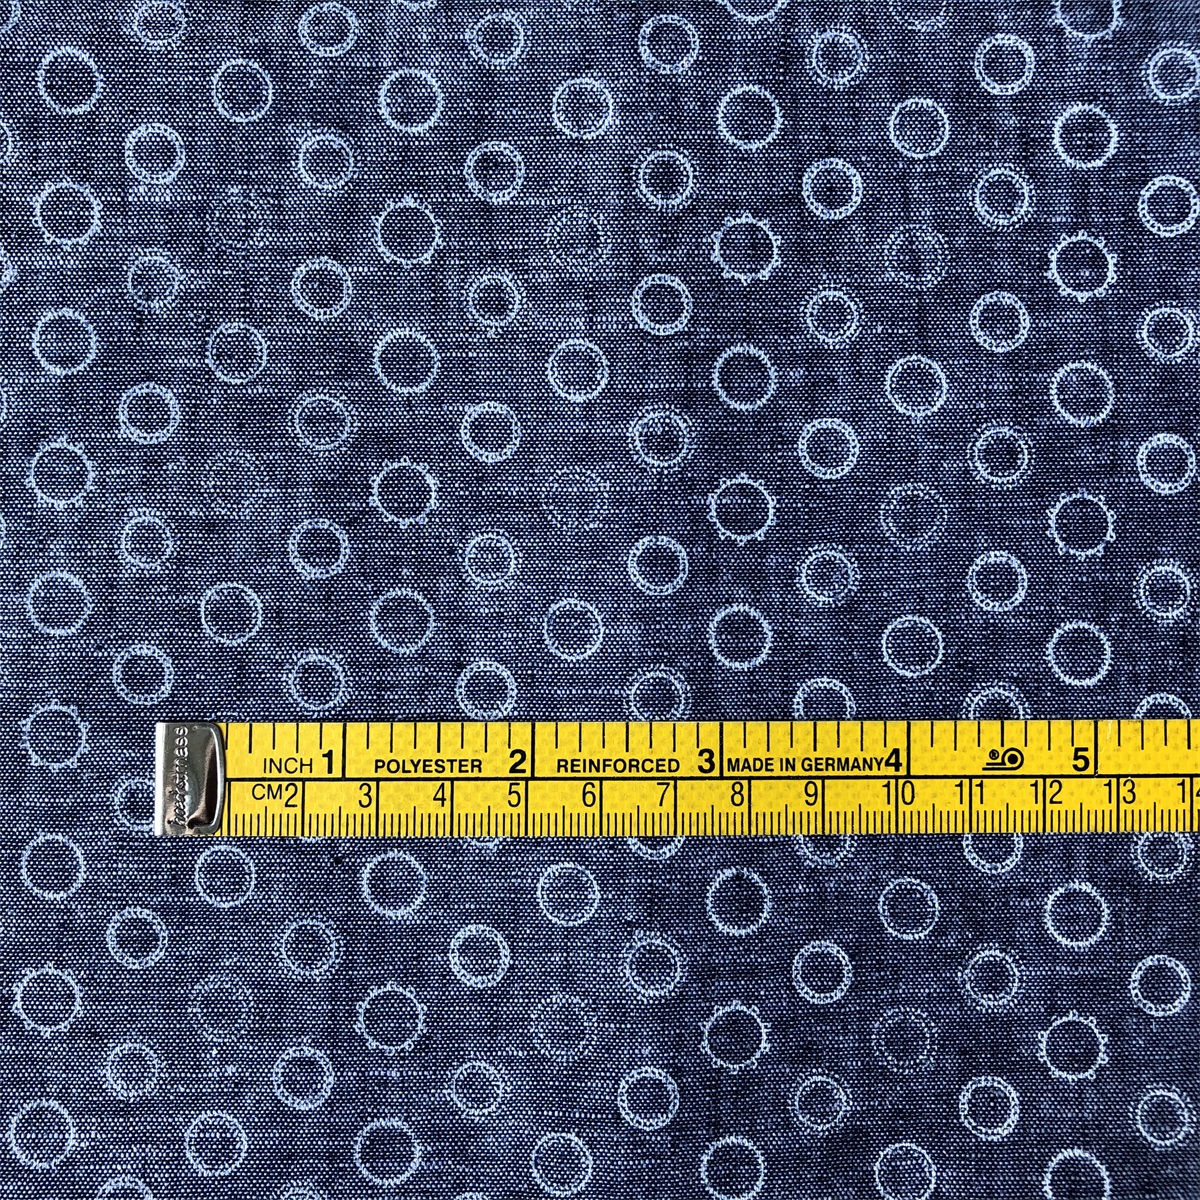 Linen Cotton Printed Fabric for men's shirts 55% linen 45% cotton printed chambray background shirts woven fabric